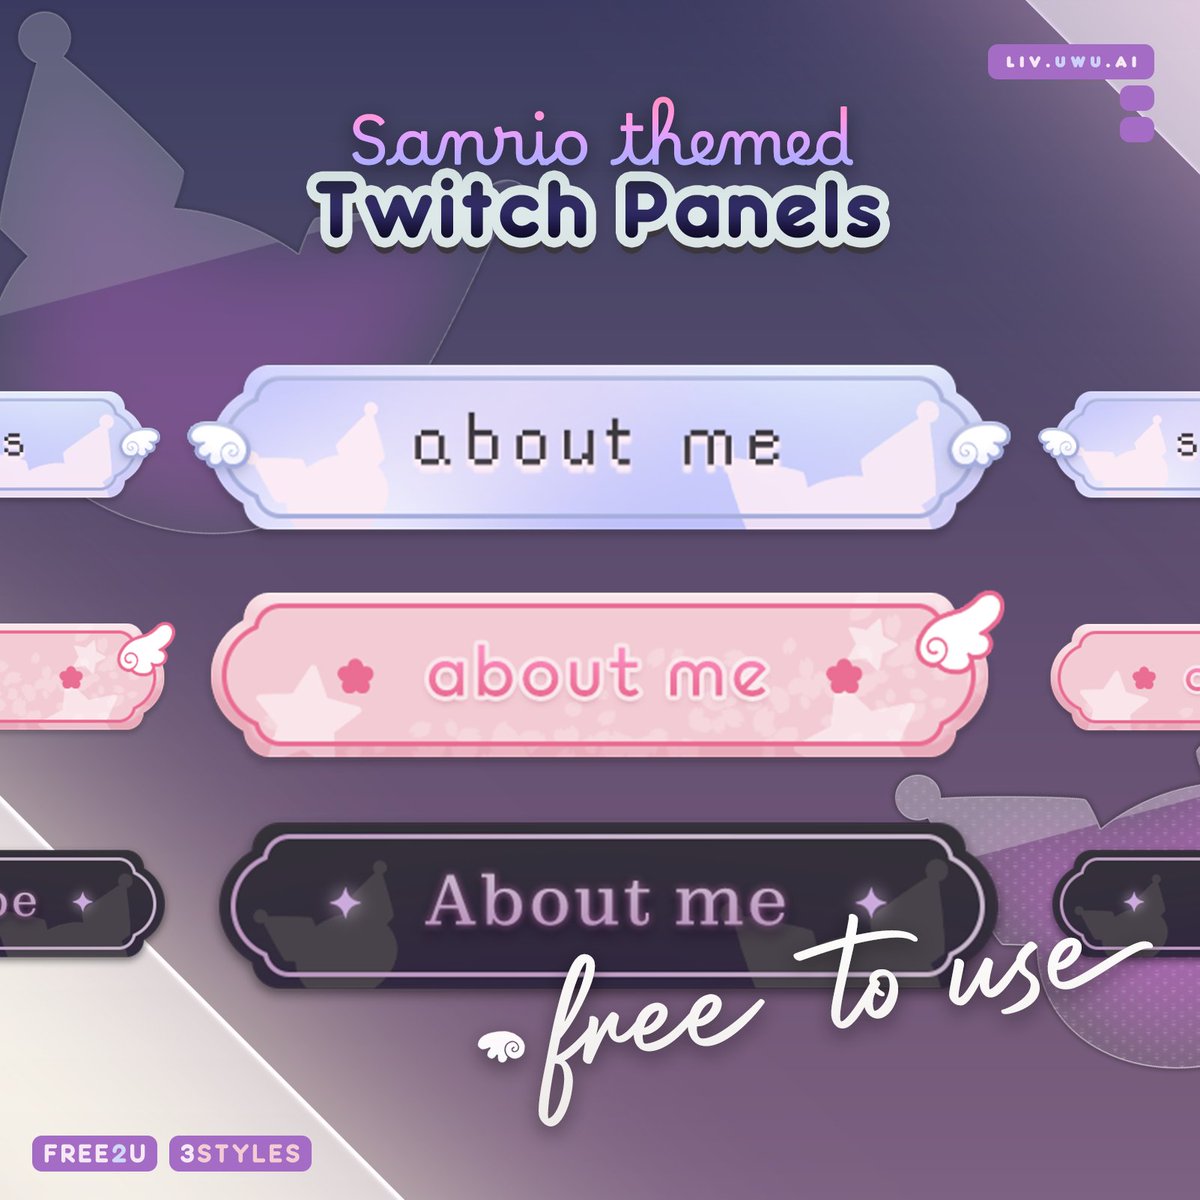 【 F2U 】 Free streaming panels for Twitch/Kick!  

🖤💜🖤  Now available on my shop!
🖤💜🛒  Ko-fi.com/s/6306c90e6e 

🔁 + 💙 is highly appreciated! #Sanrio
#VtuberAssets #FreeVtuberAssets #F2U